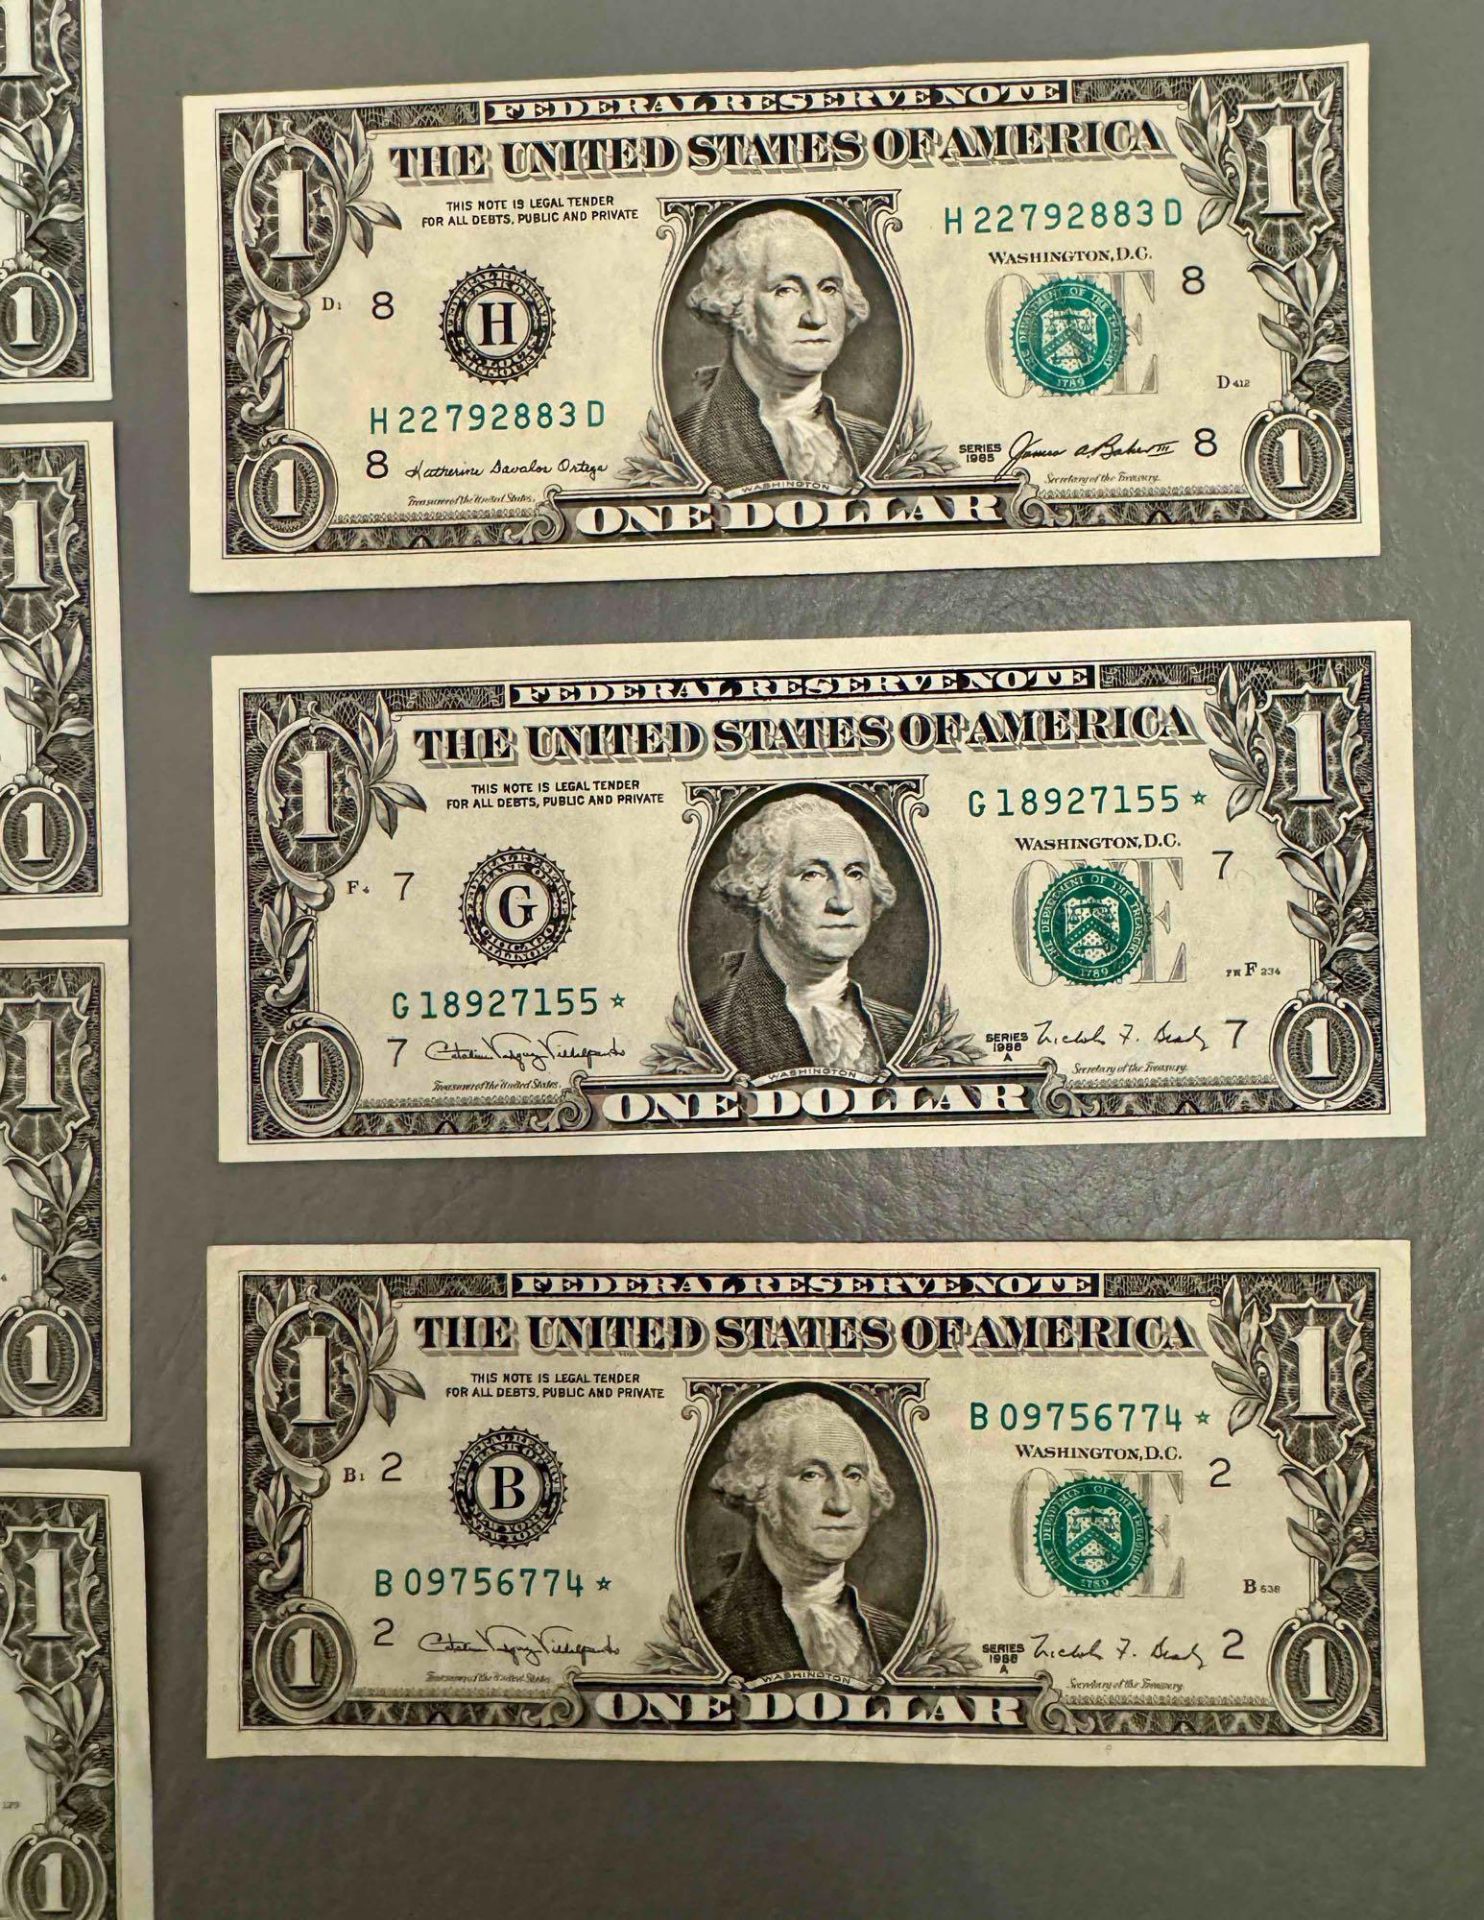 Currency uncirculated notes: 1999 $10 Star Note, 1976 First Day issue w/stamp $2 note, 1963 $1 Note, - Image 5 of 6